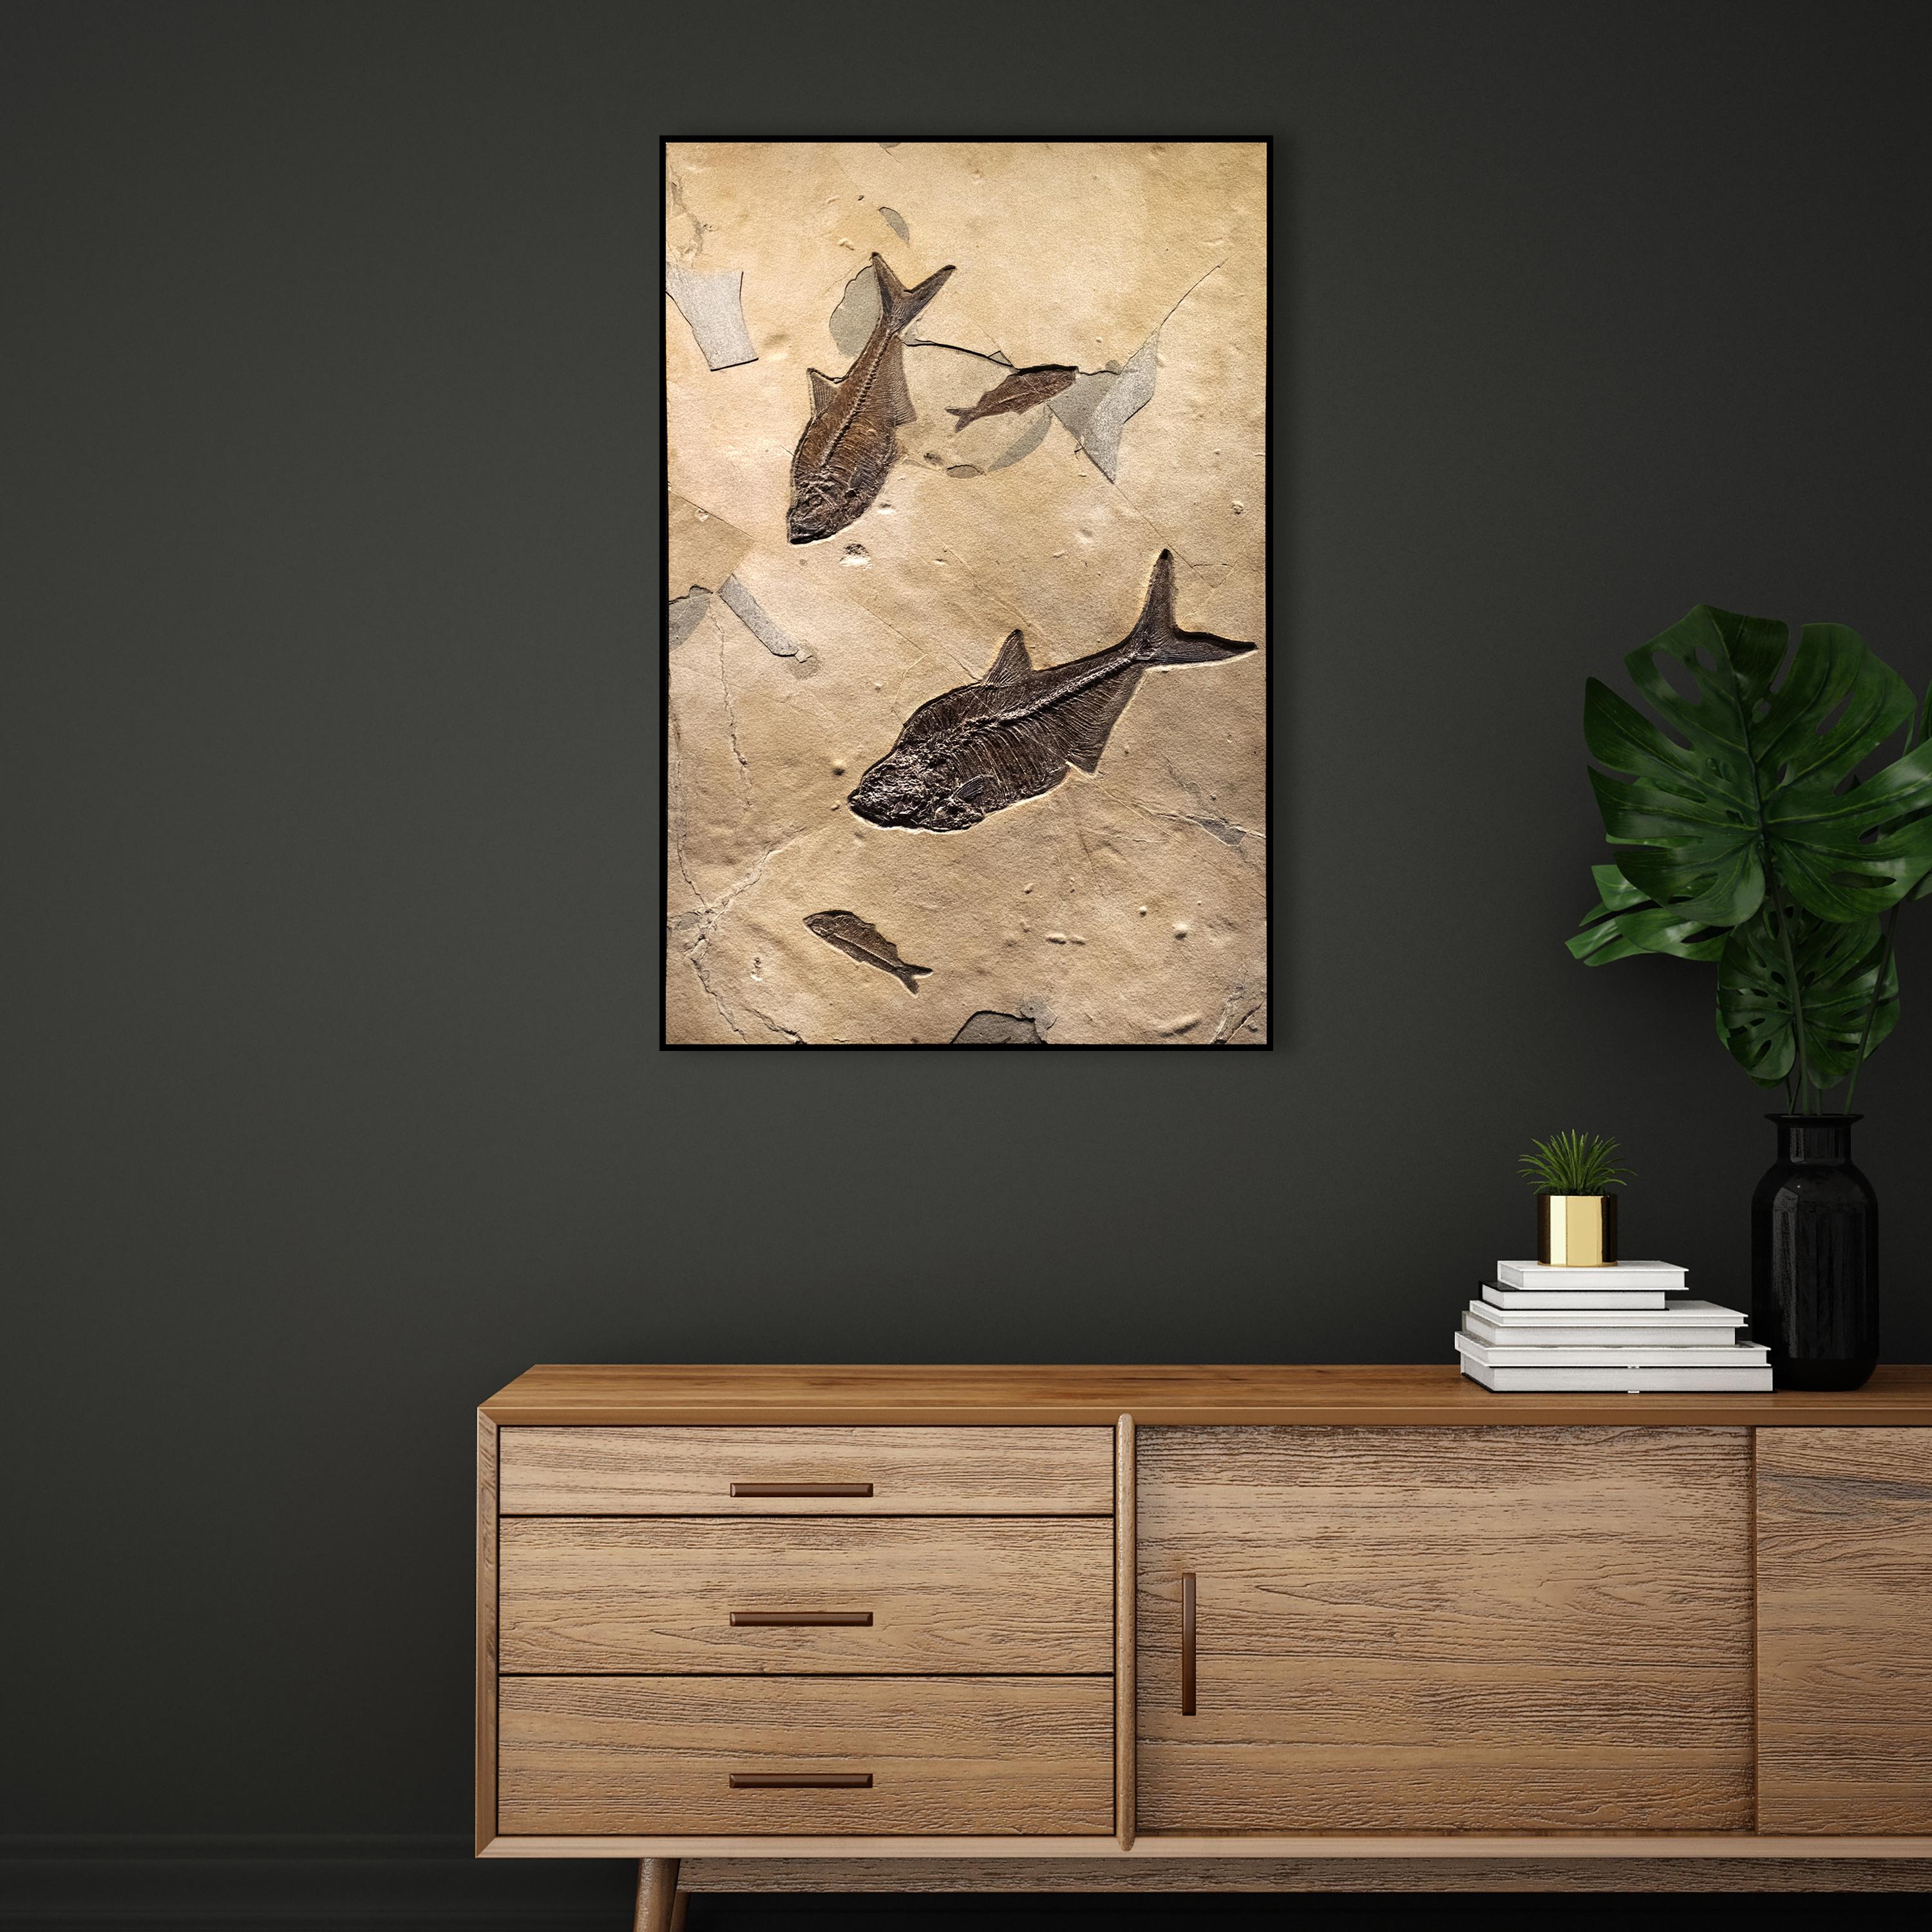 This unique fossil mural features two Diplomystus dentatus and two Knightia eocaena, all of which are Eocene era fossils dating back about 50 million years. This grouping of ancient fish is forever preserved in a beautifully textured matrix of